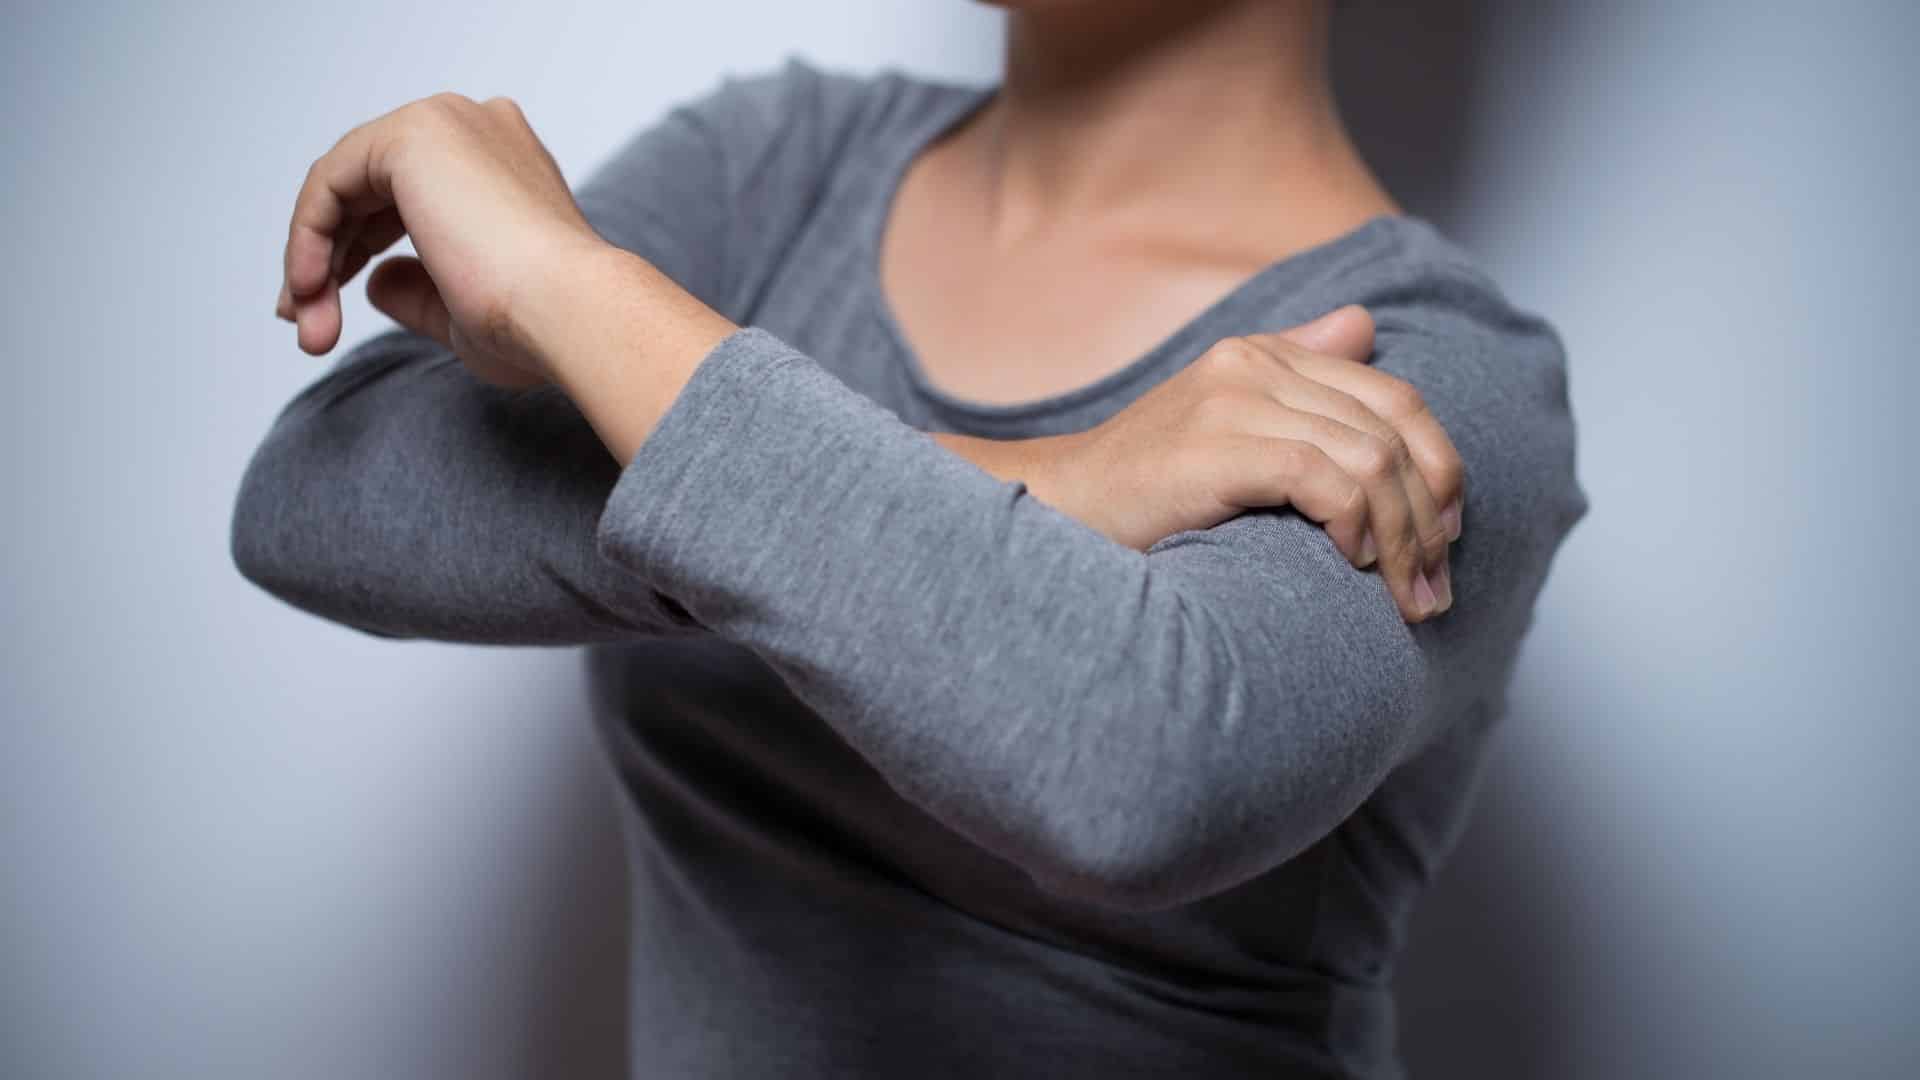 Woman suffering from Pins and Needles in her arm